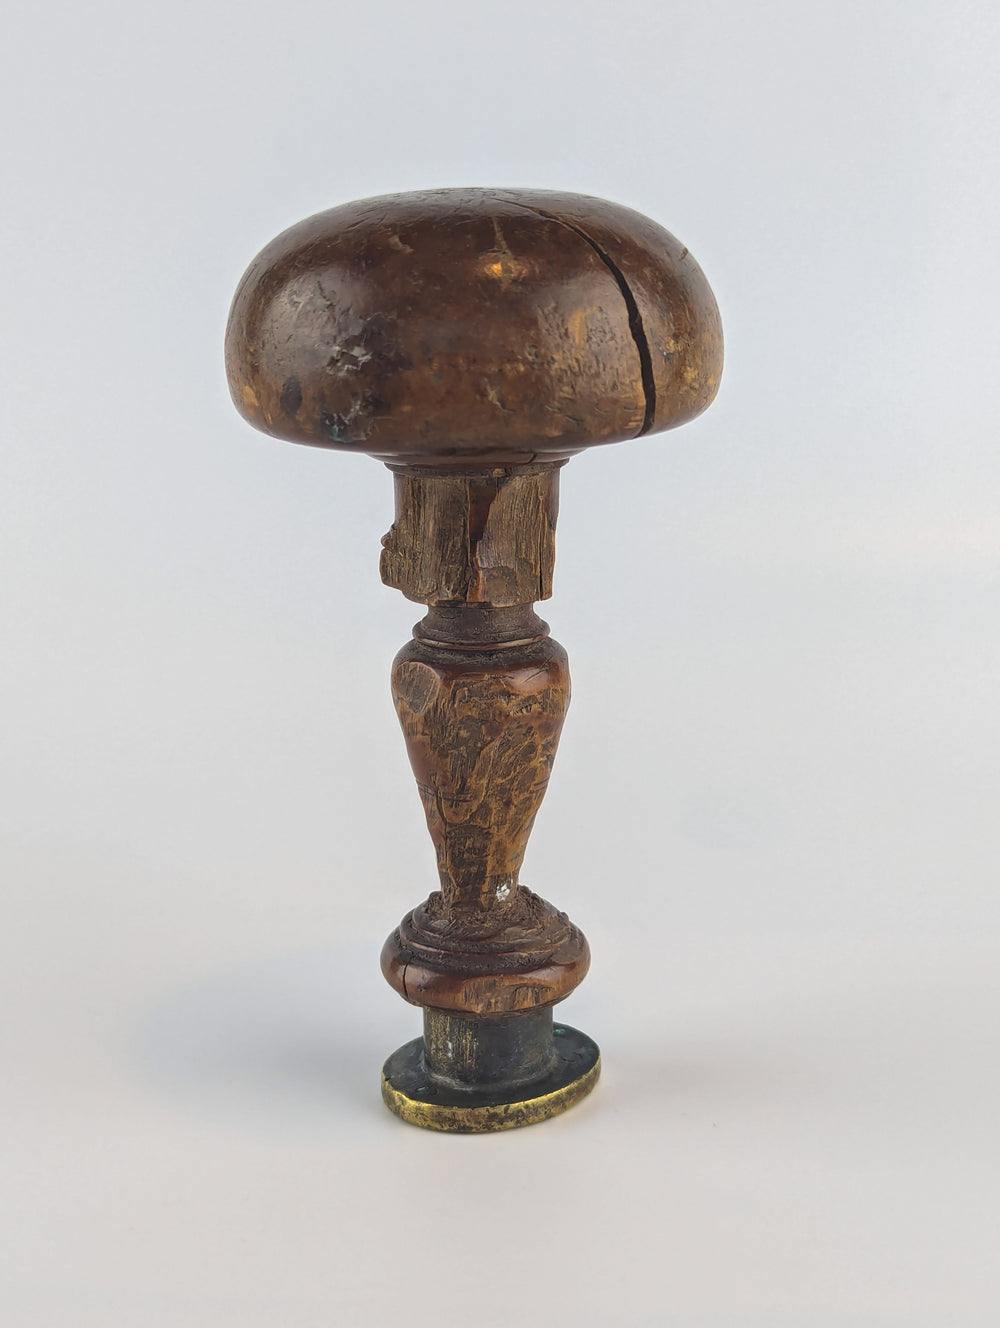 Mushroom Handle Brass Early 18thc French Town Desk Stamp